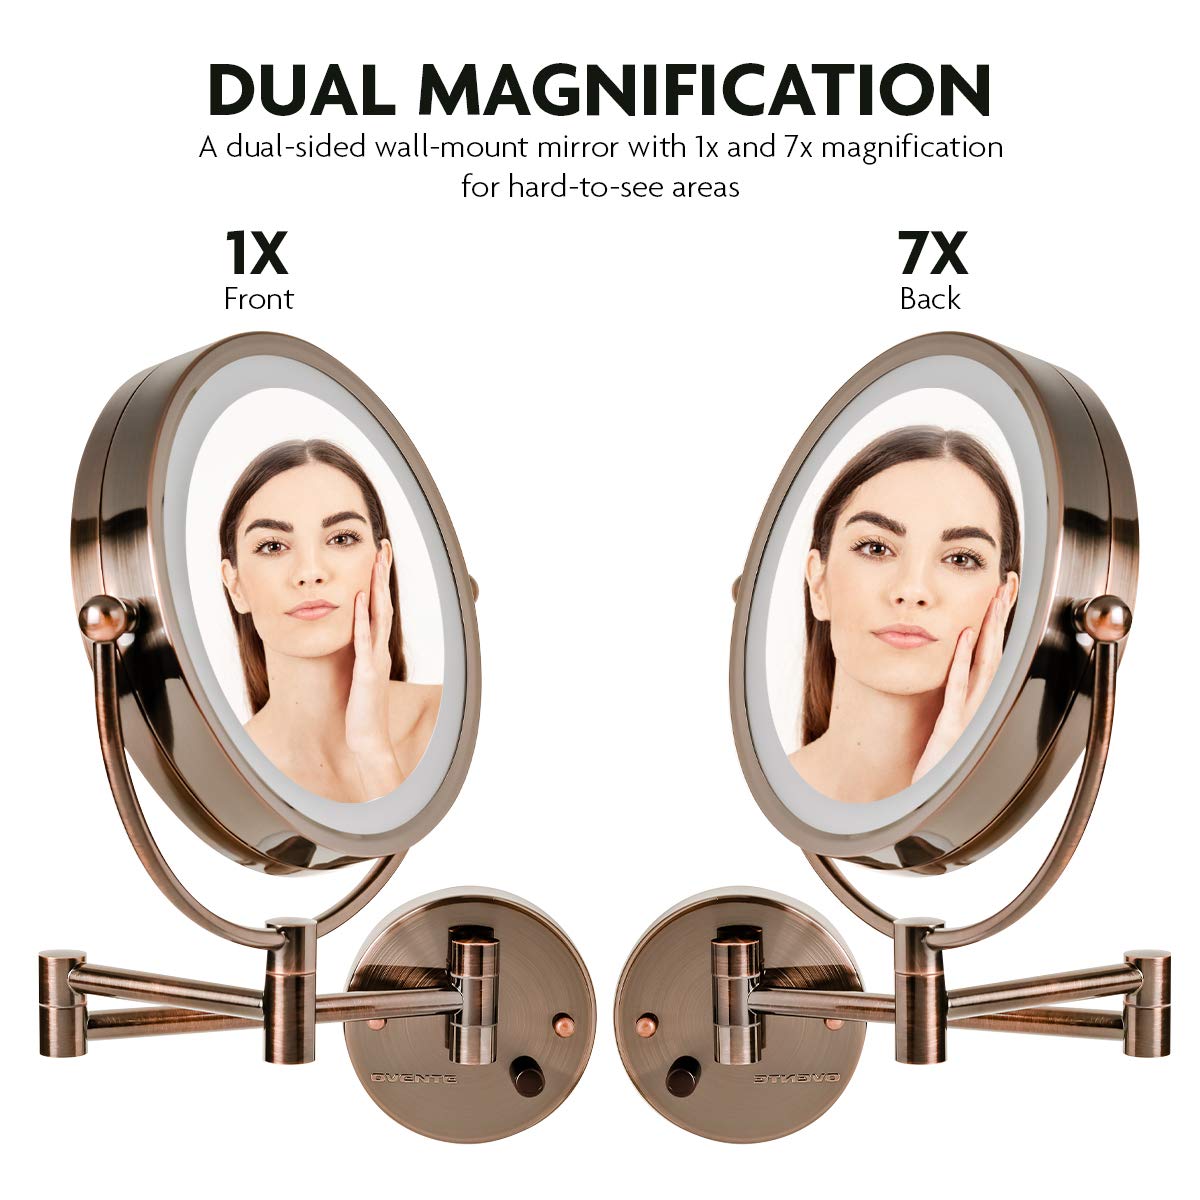 OVENTE 9" Lighted Wall Mount Makeup Mirror - 1X/ 7X Magnification, Hardwired Glow Cosmetic Light up Mirror, Spinning 360-Degree, Double Sided LED, Extendable, Folding Arm, Antique Brass MPWD3185AB1X7X